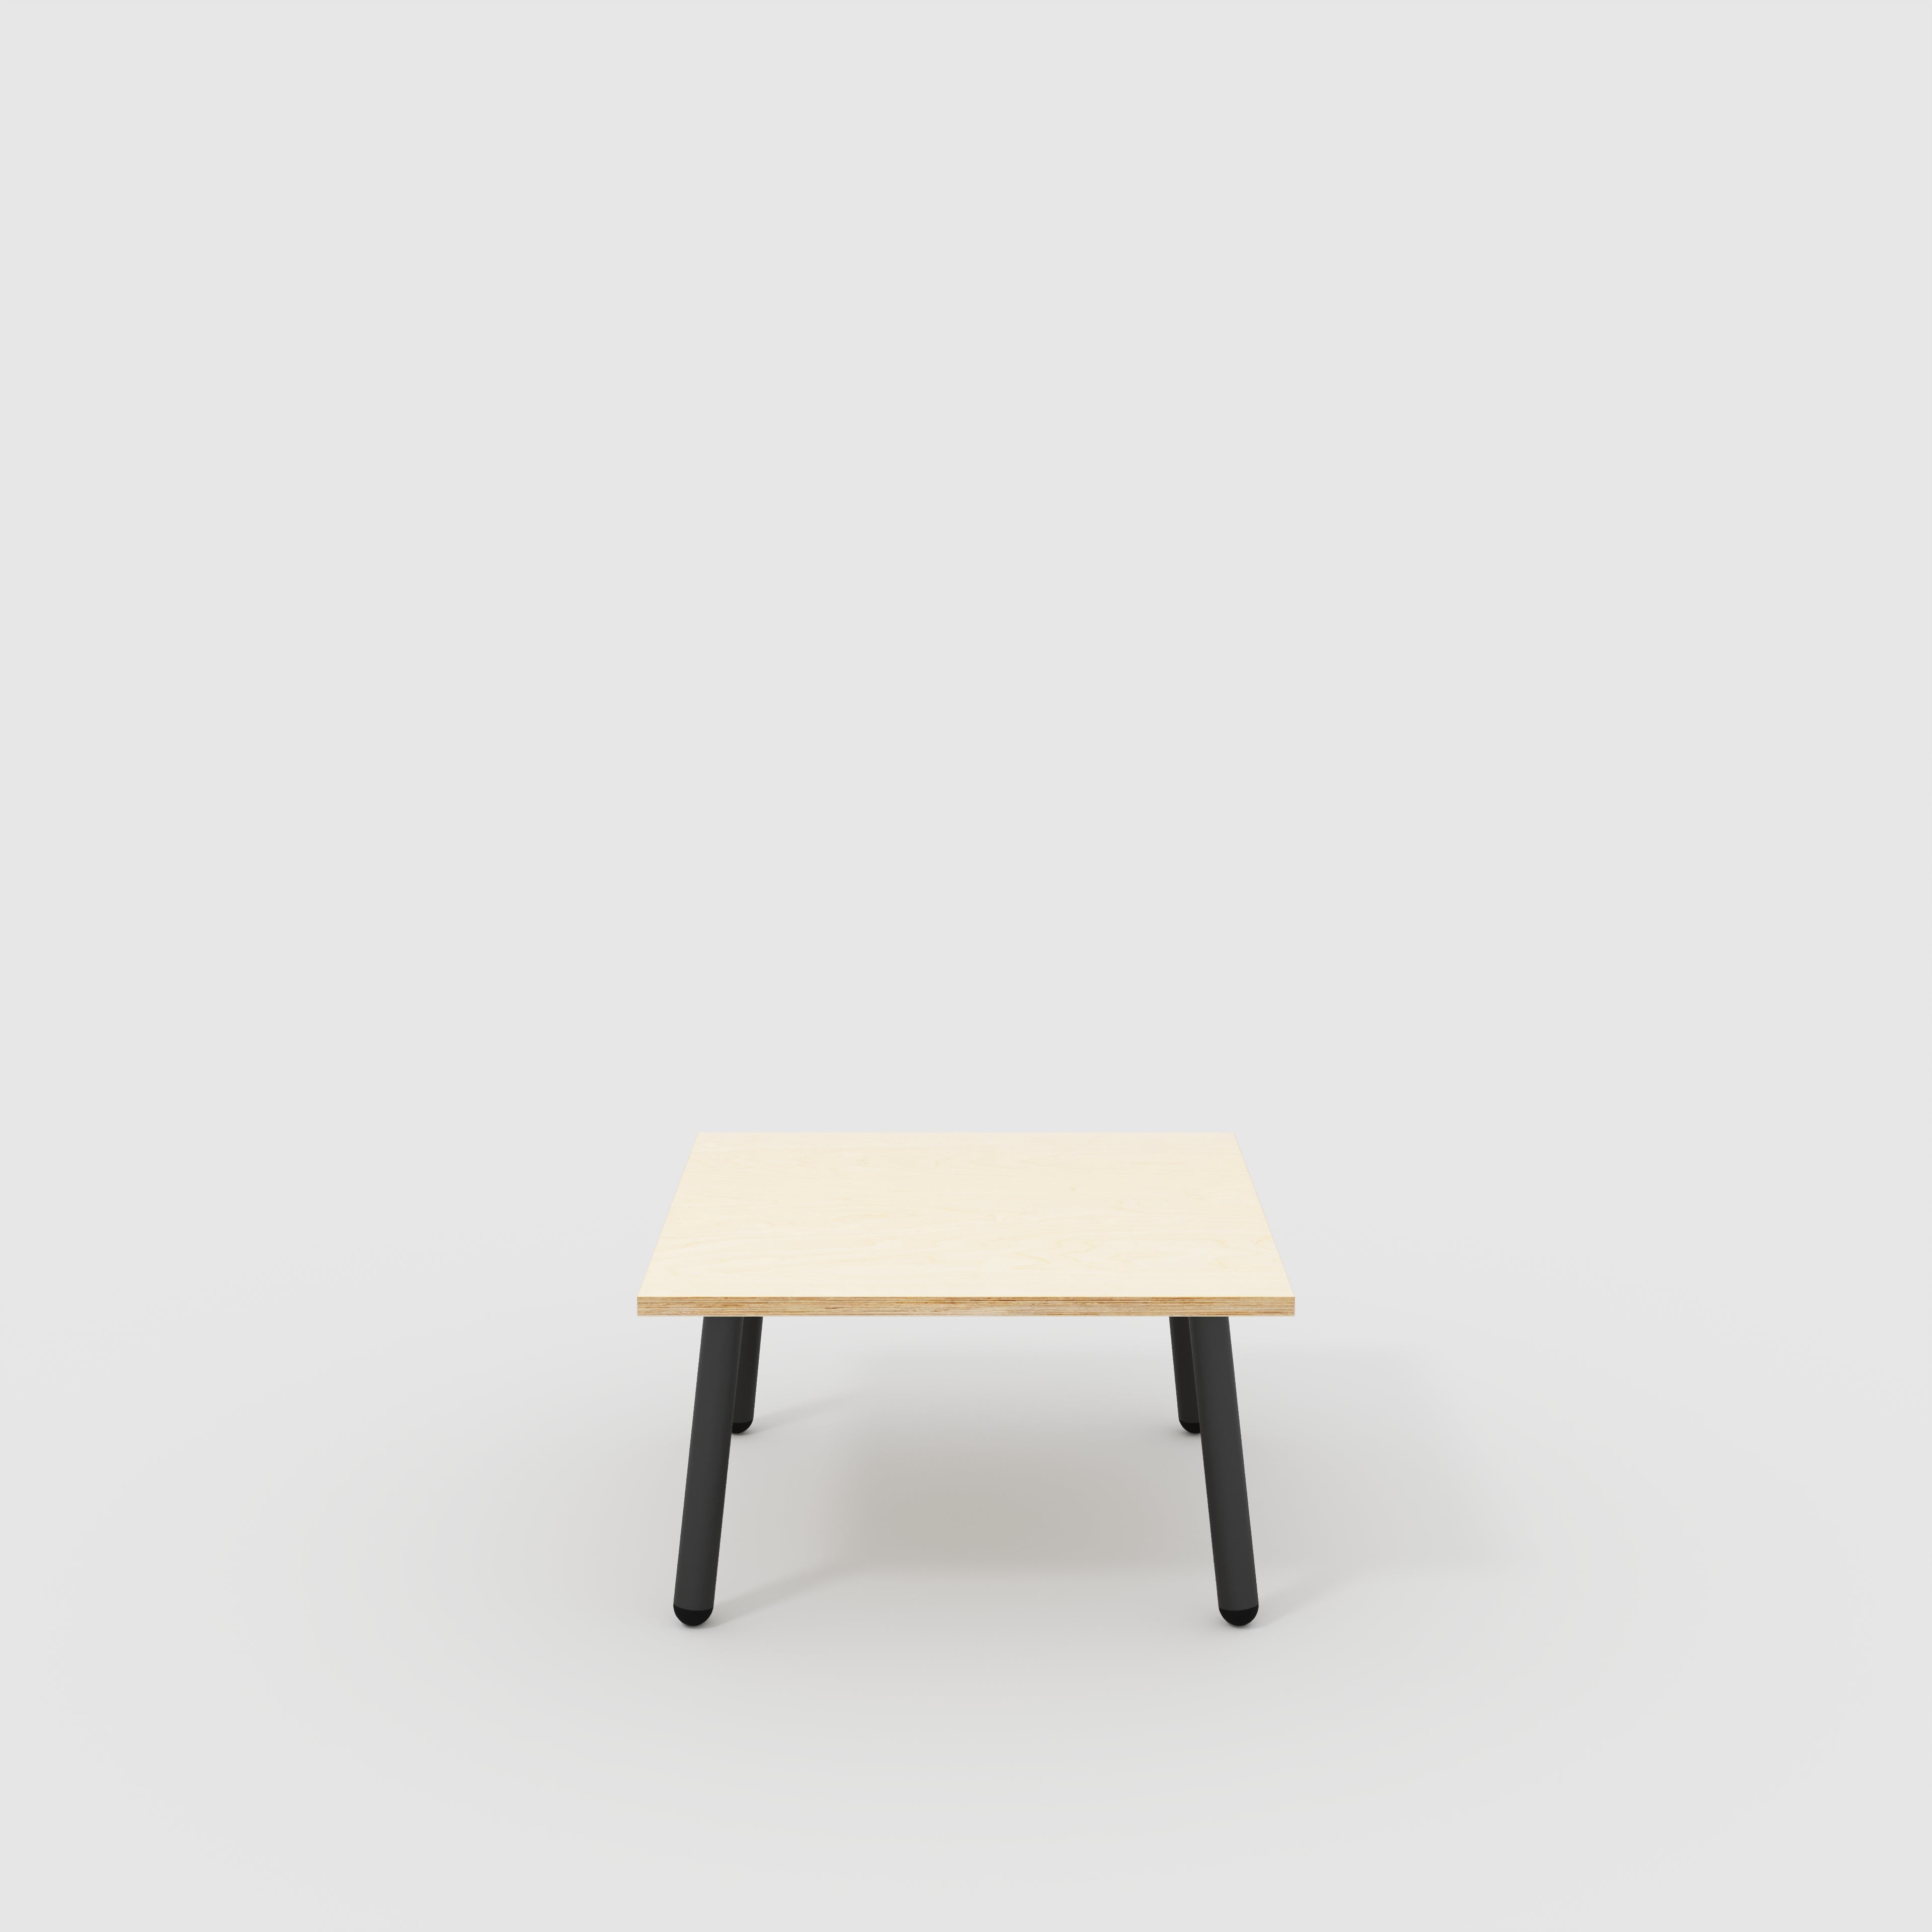 Coffee Table with Black Round Single Pin Legs - Plywood Birch - 800(w) x 800(d) x 425(h)